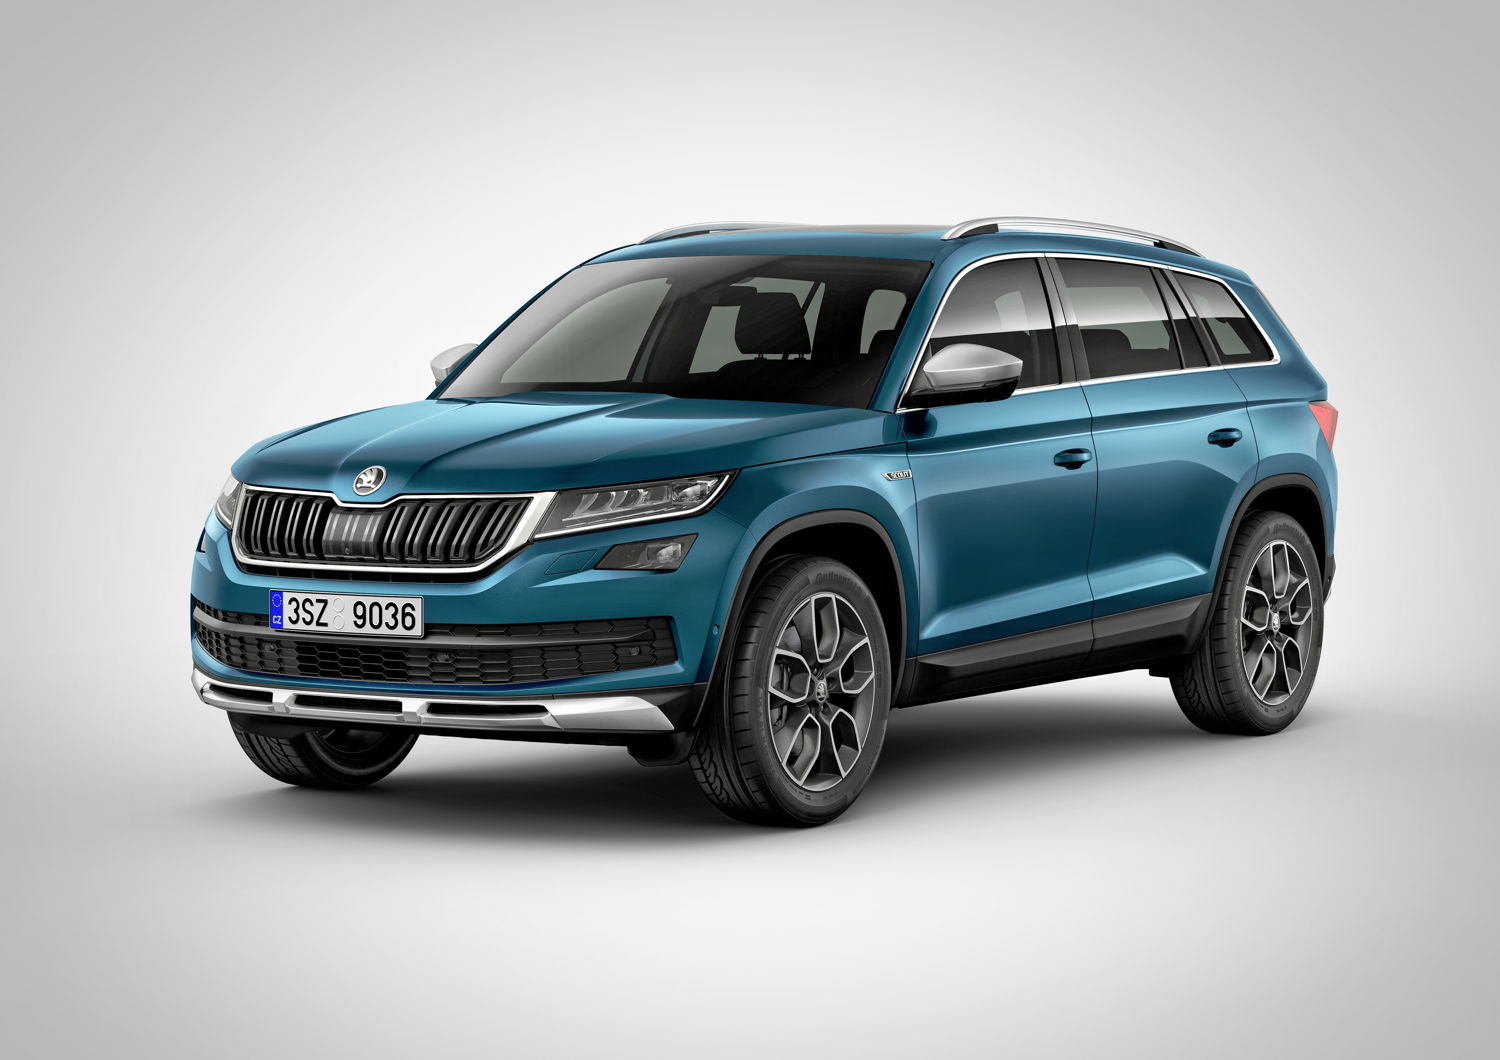 The 19-inch alloy wheels specially created for the ŠKODA KODIAQ SCOUT also contribute to its powerful appearance.